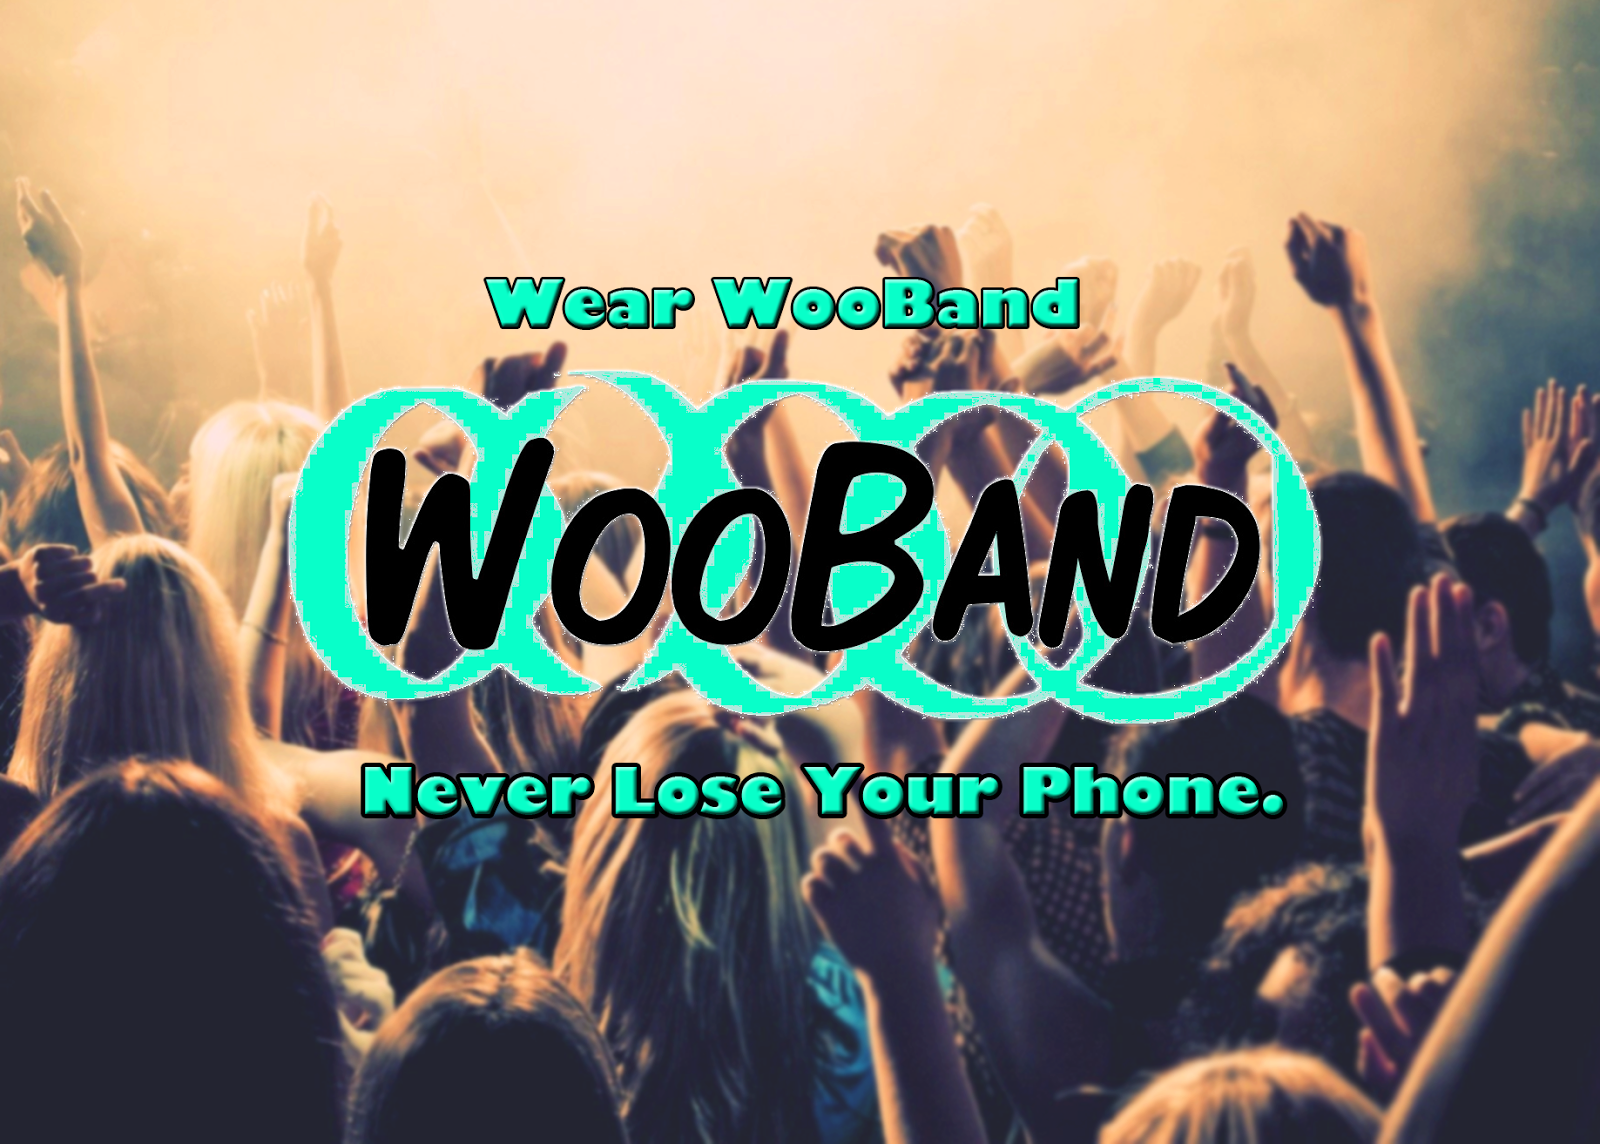 Wear WOOband - Never lose your phone.